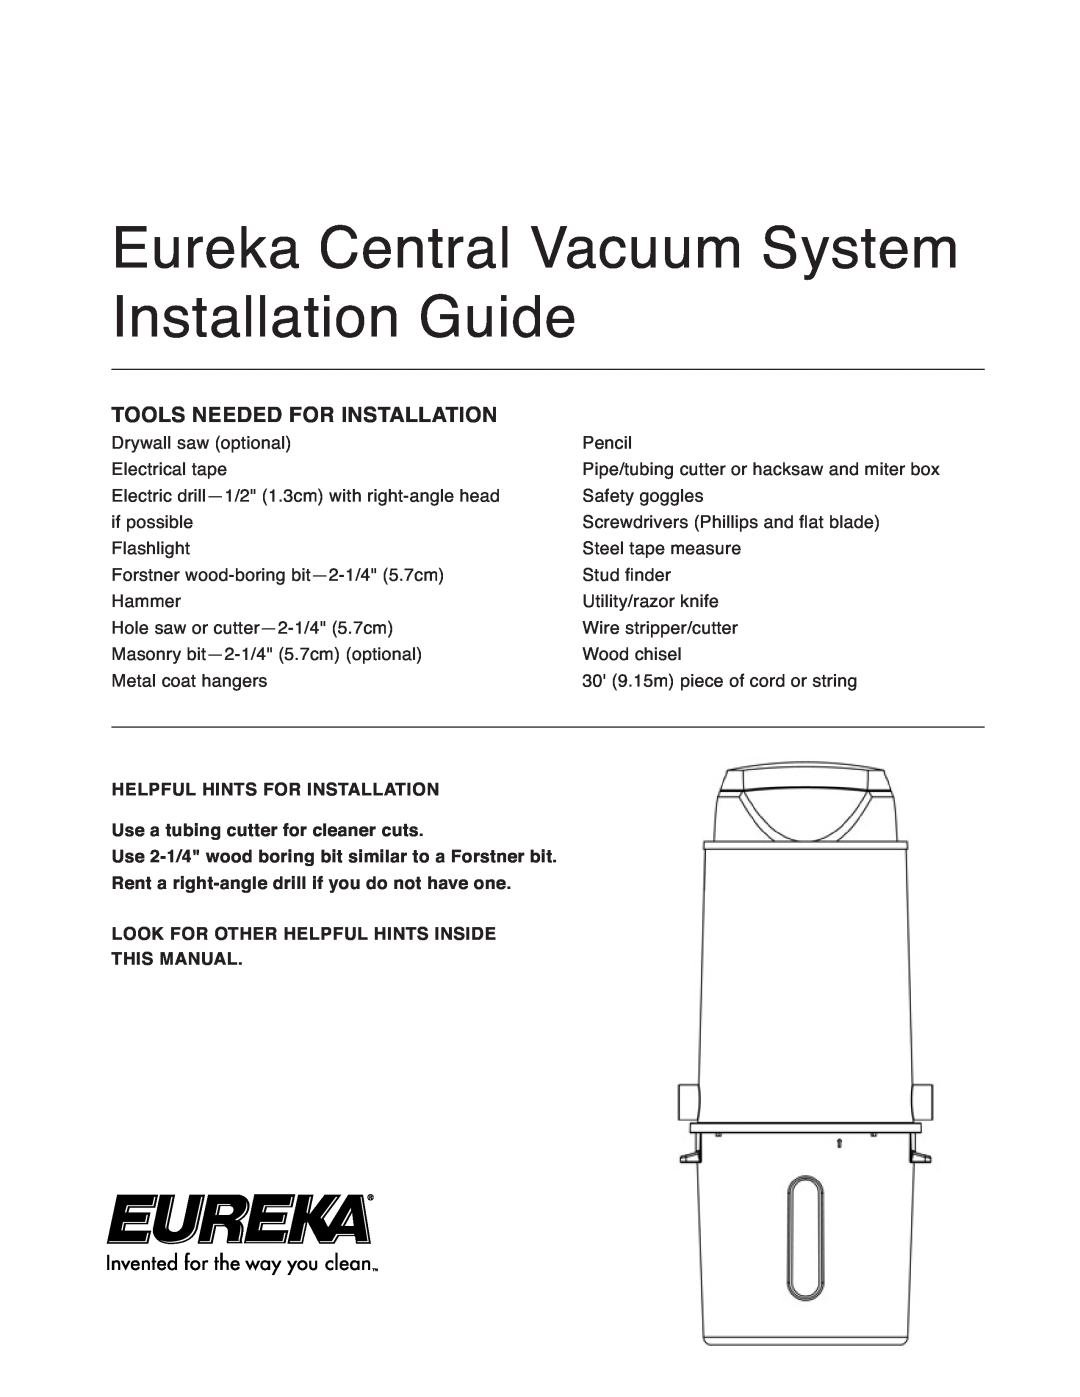 Eureka Central Vacuum Cleaner manual Eureka Central Vacuum System Installation Guide, Tools Needed For Installation 